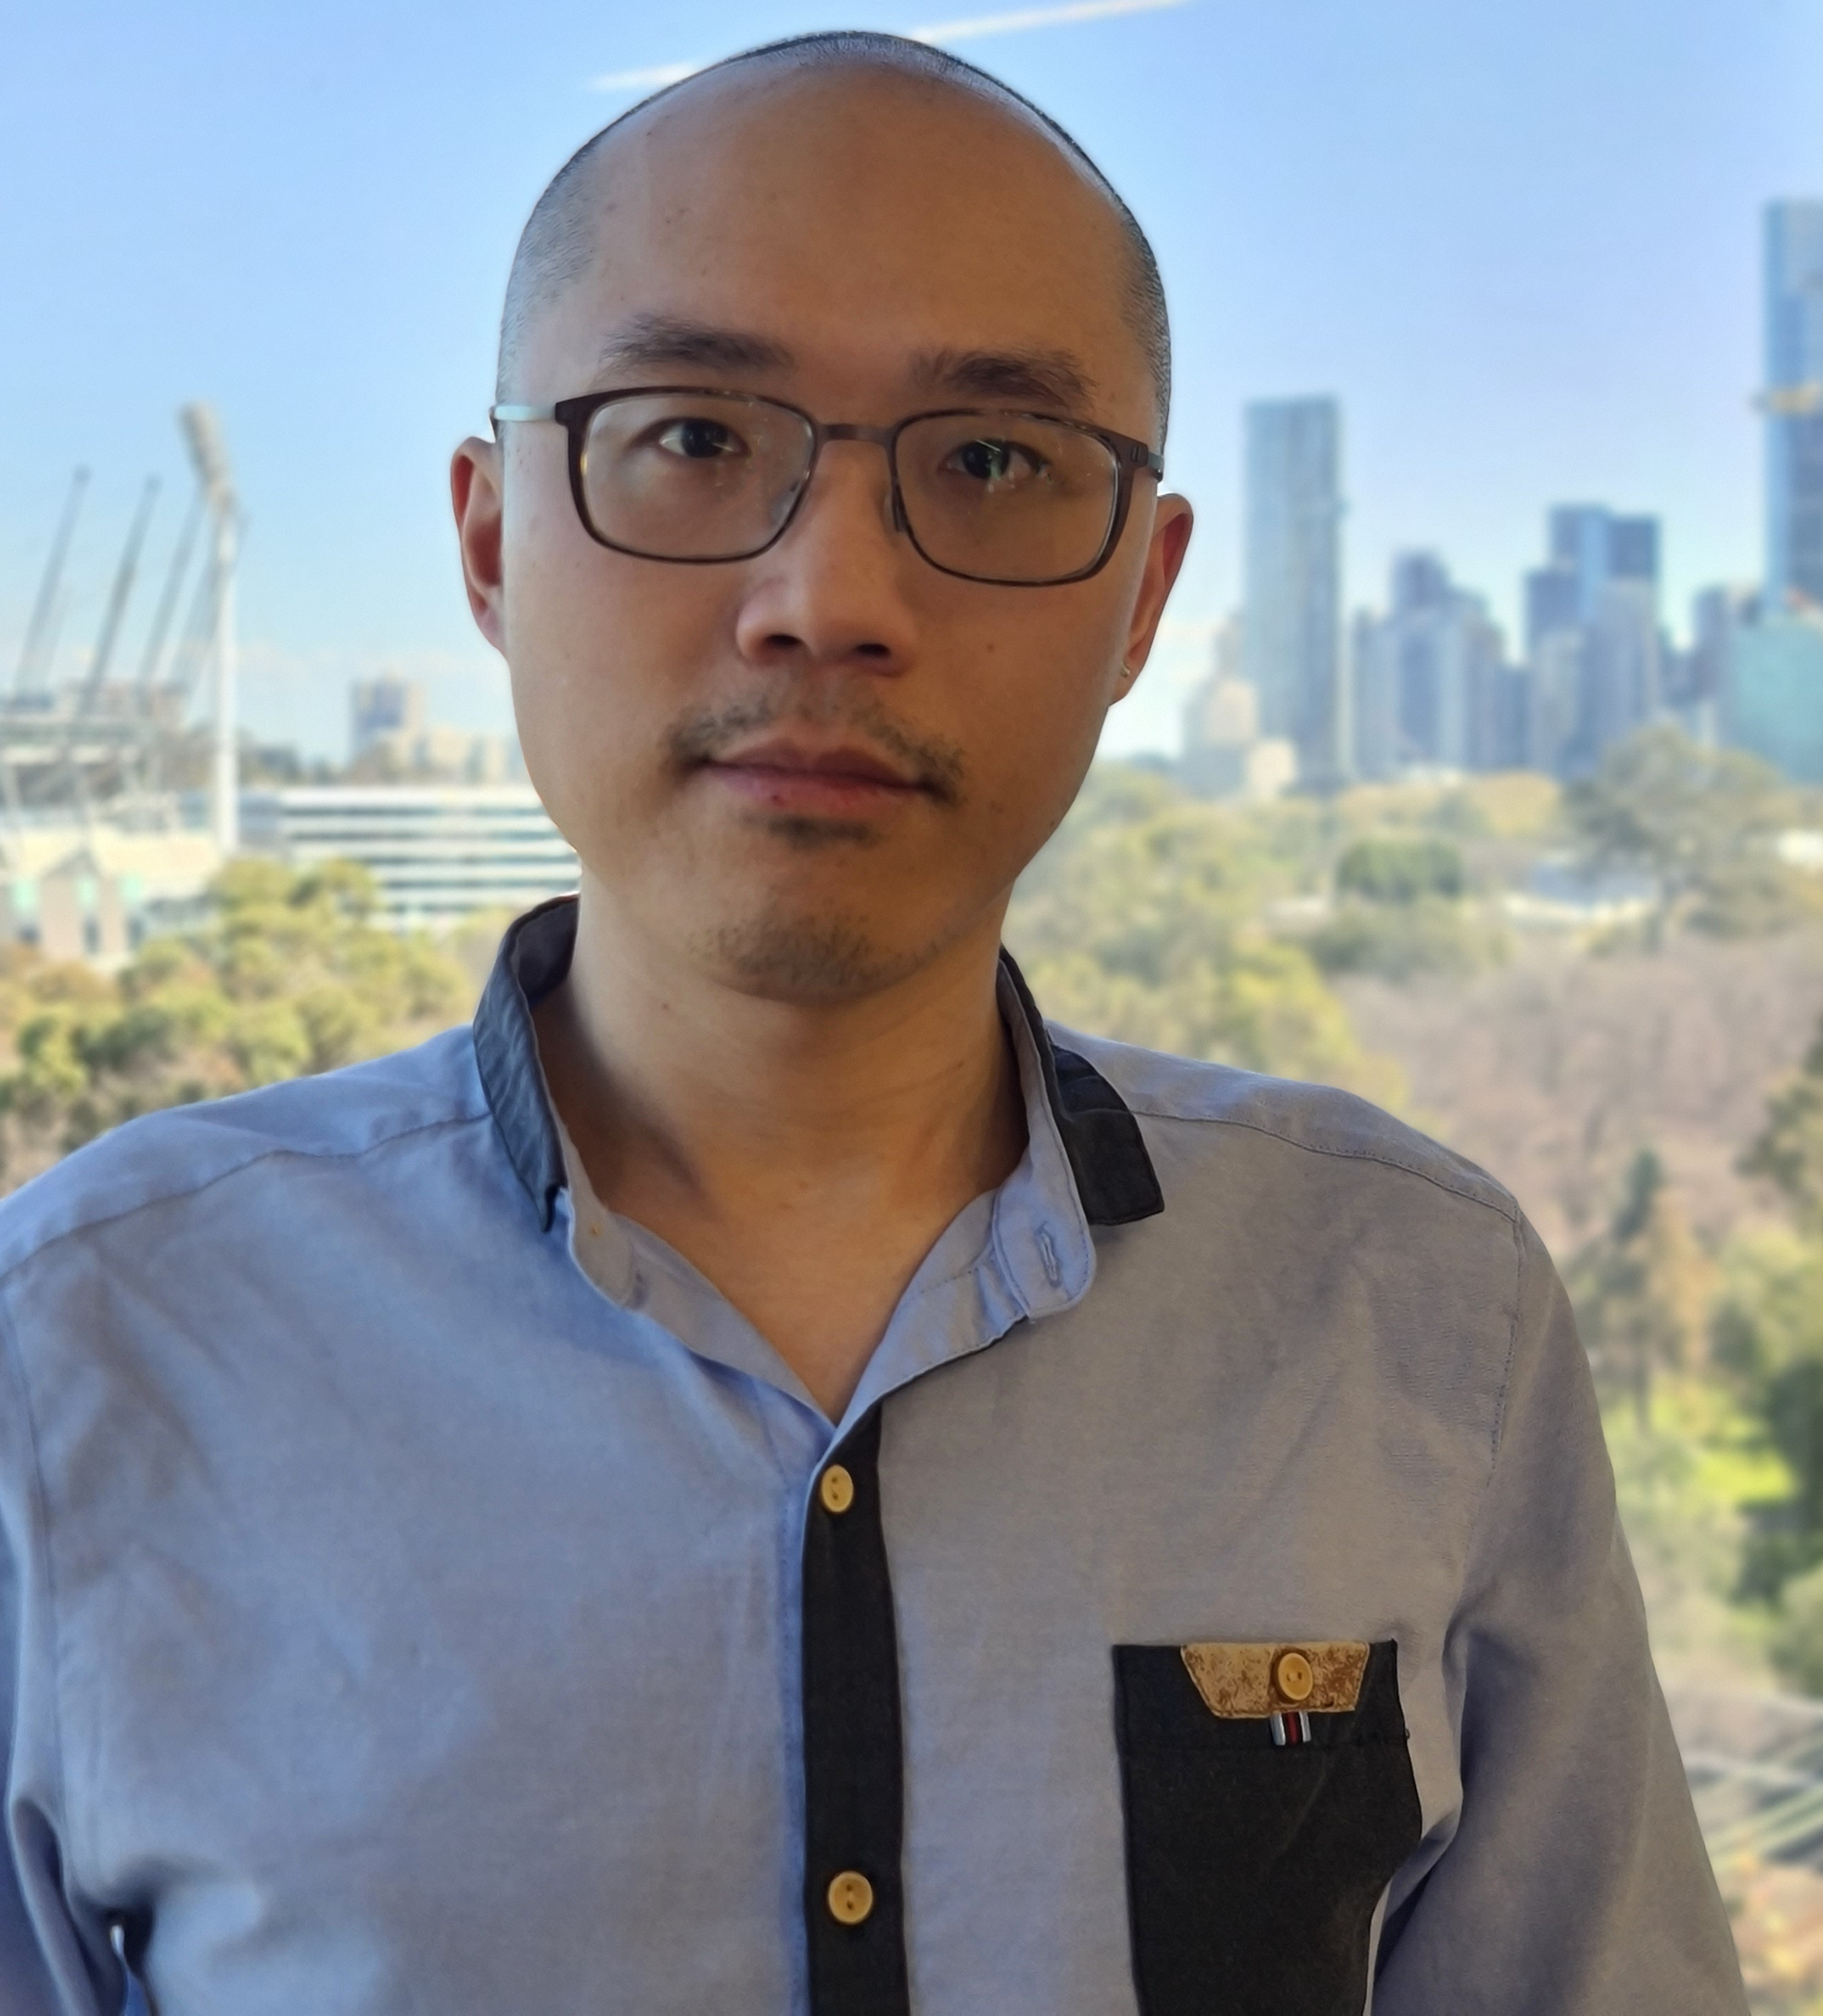 Erik Wu, a young Asian man, stands in front of a window with a cityscape and gardens behind him. He has no hair, and wears black rimmed glasses. He is wearing a blue button up shirt with black details around the buttons, pocket and collar.